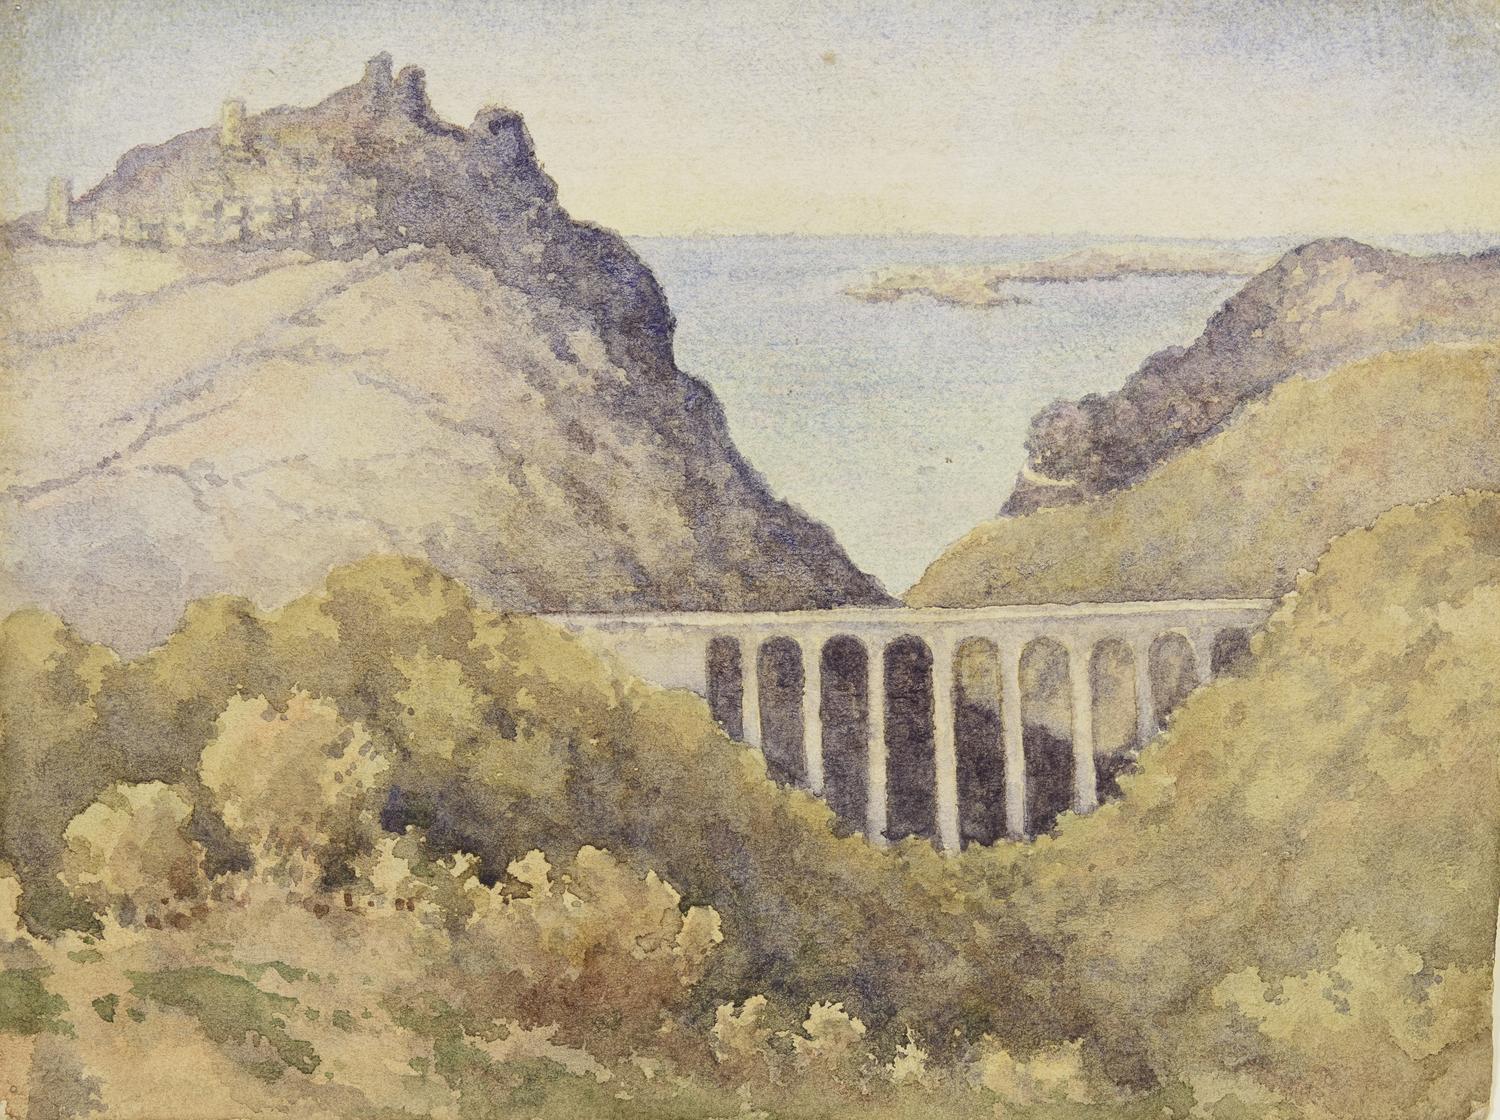 The Viaduct